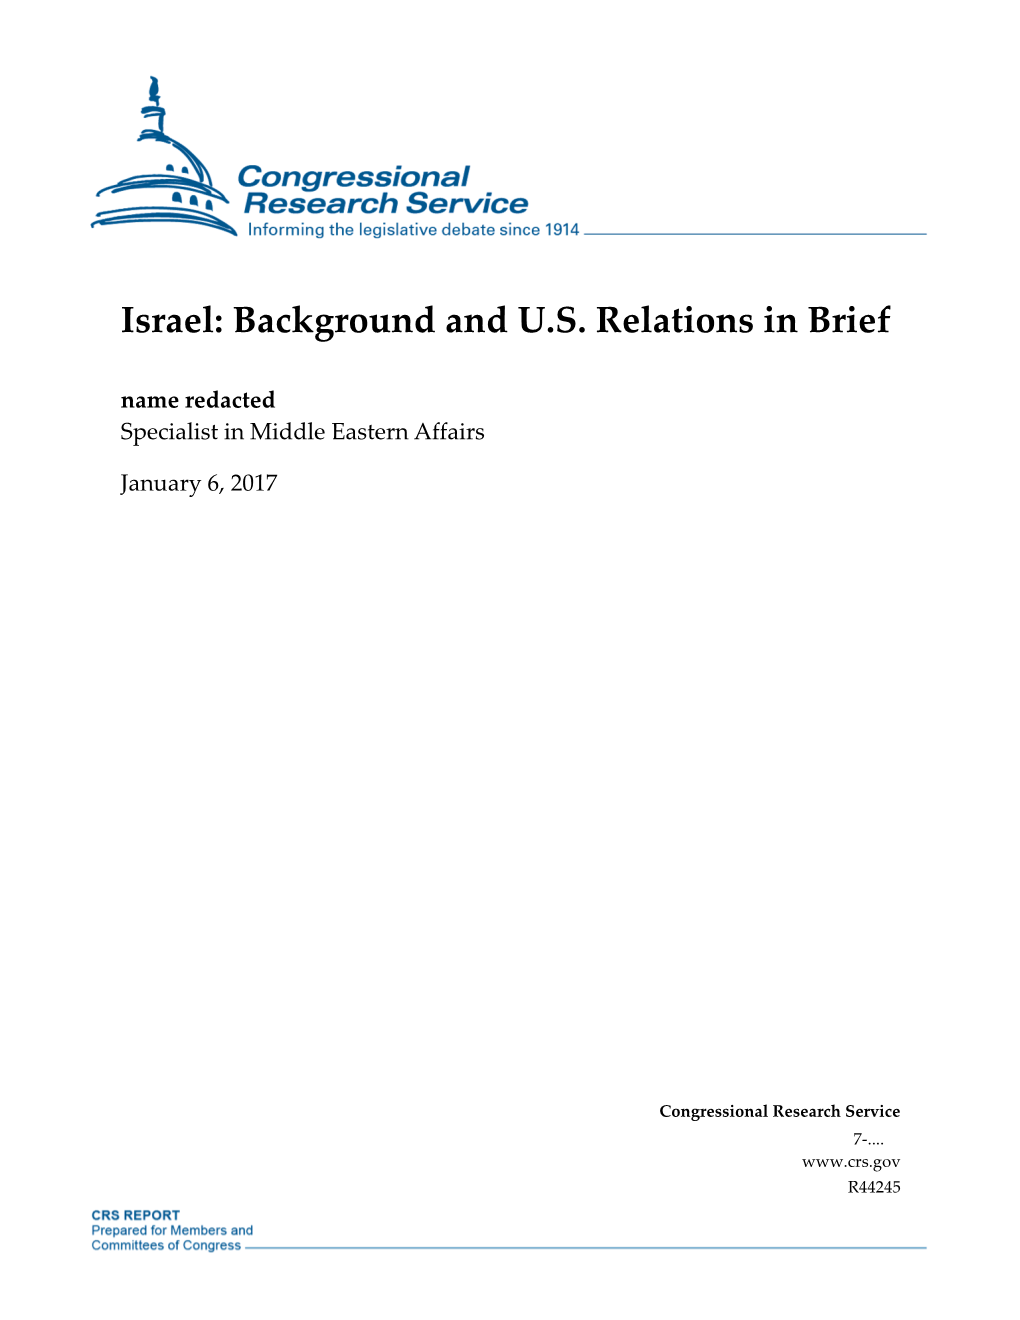 Background and US Relations in Brief